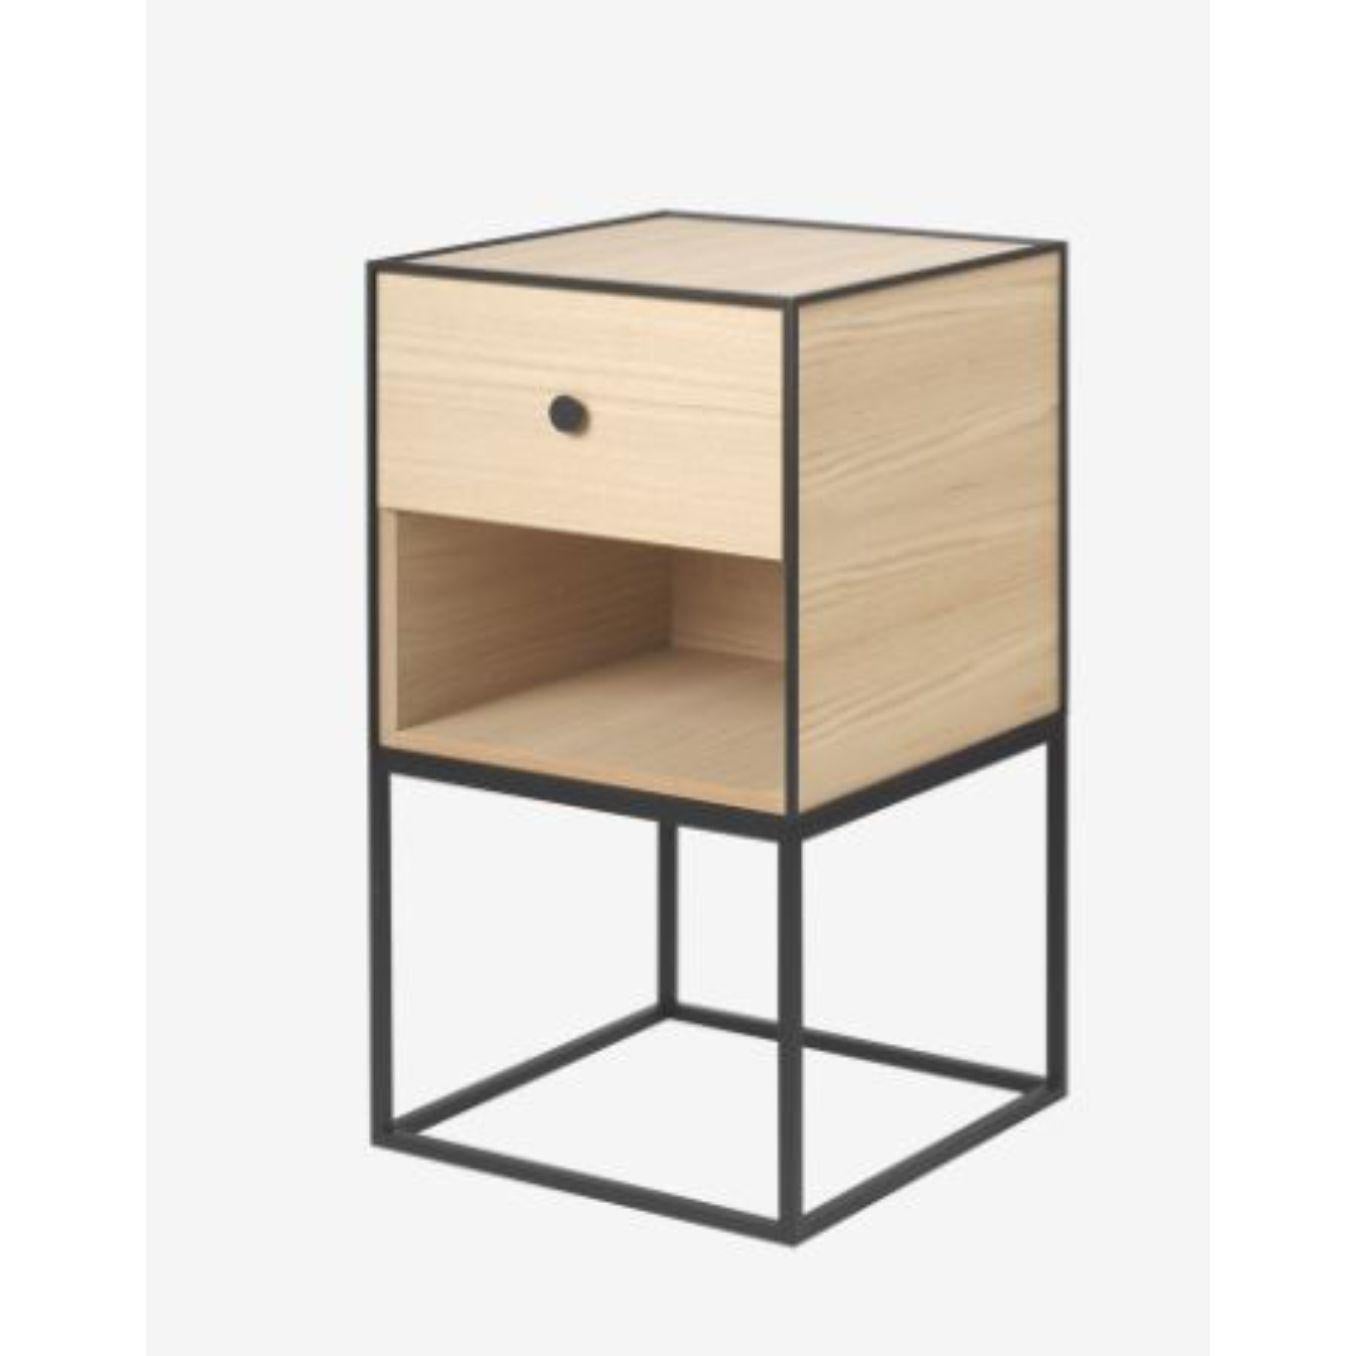 35 oak frame sideboard with 1 drawer by Lassen
Dimensions: W 35 x D 35 x H 63 cm 
Materials: Finér, Melamin, Melamine, Metal, Veneer, Oak
Also available in different colors and dimensions. 
Weight: 15.50 Kg

By Lassen is a Danish design brand